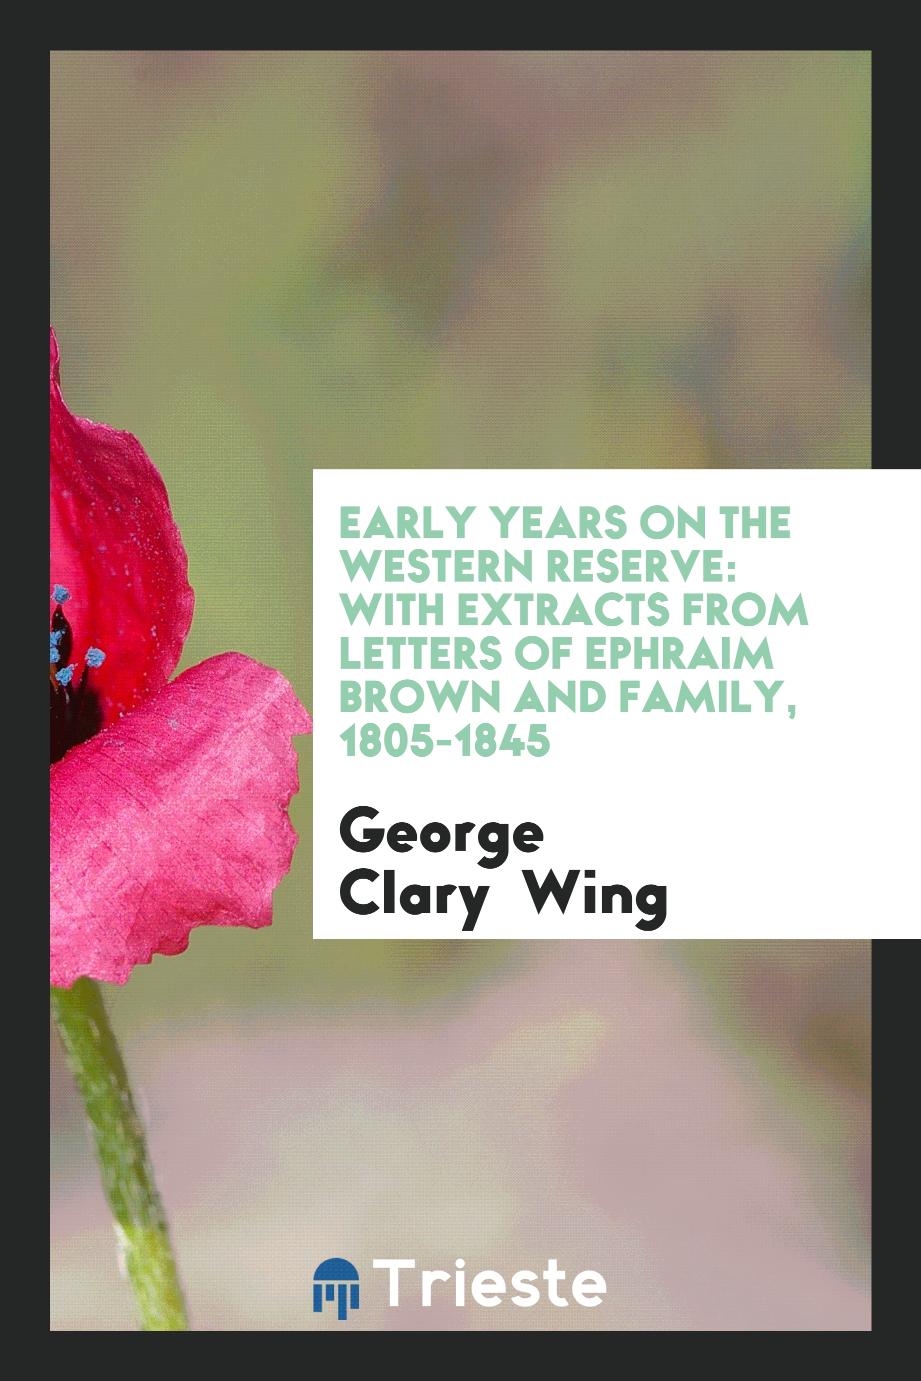 Early Years on the Western Reserve: With Extracts from Letters of Ephraim Brown and Family, 1805-1845